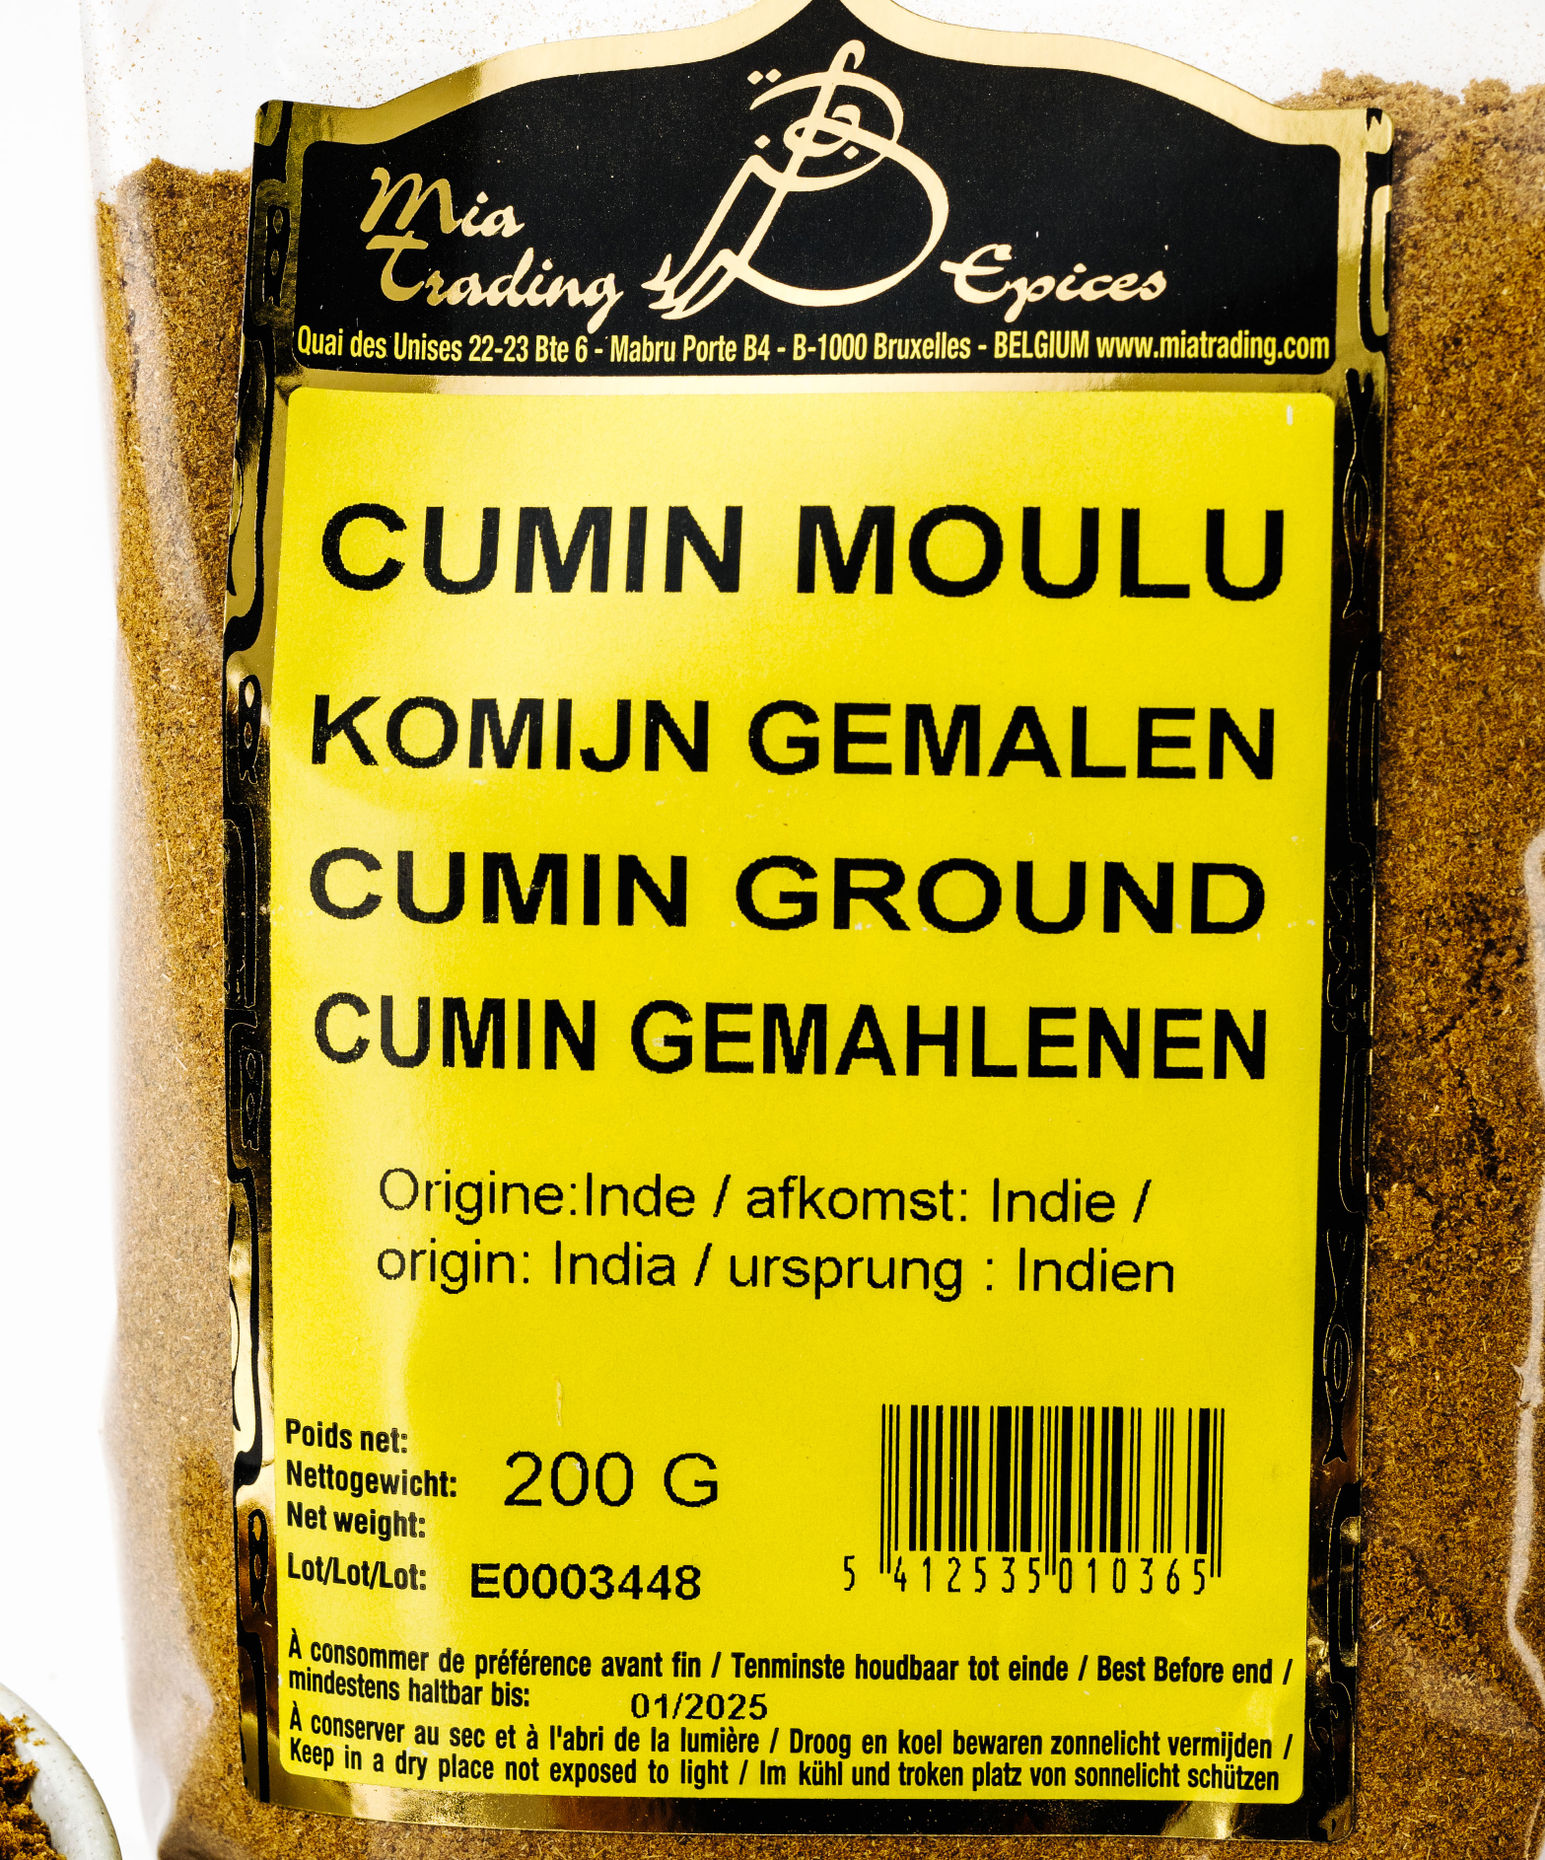 B Spices Grounded Cumin